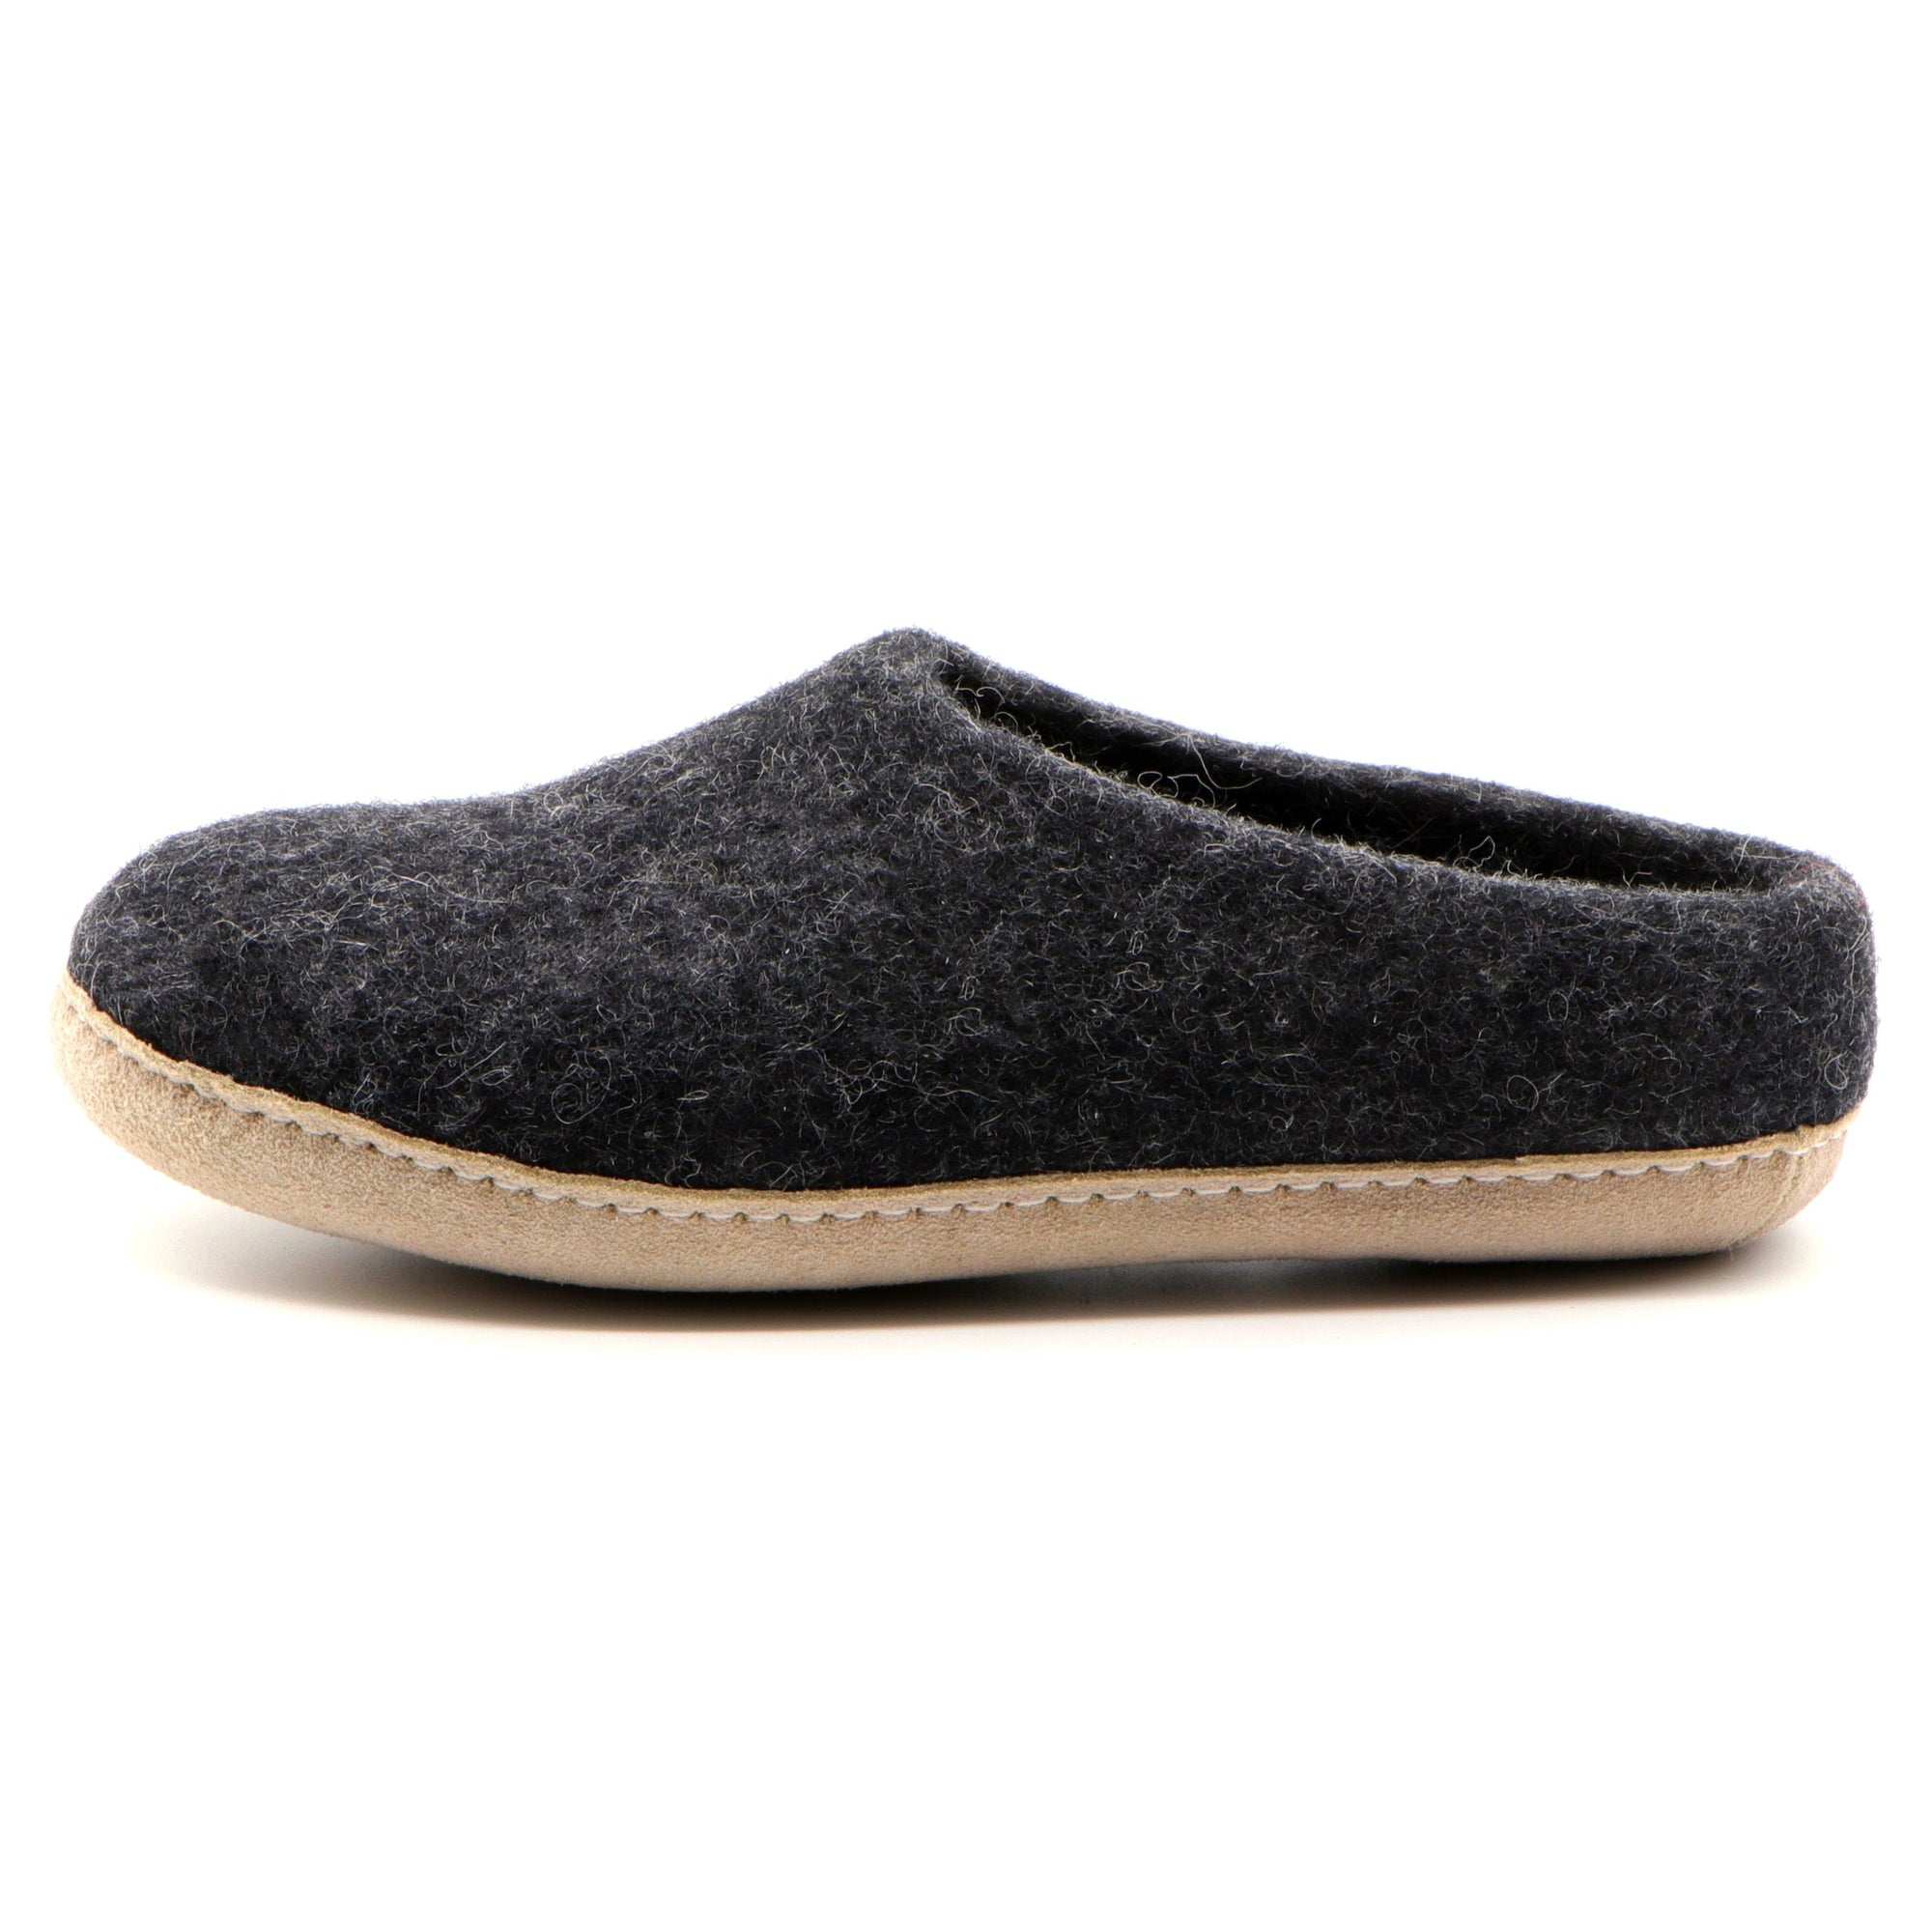 Nootkas Newport Wool House Shoe in Charcoal with tan sole